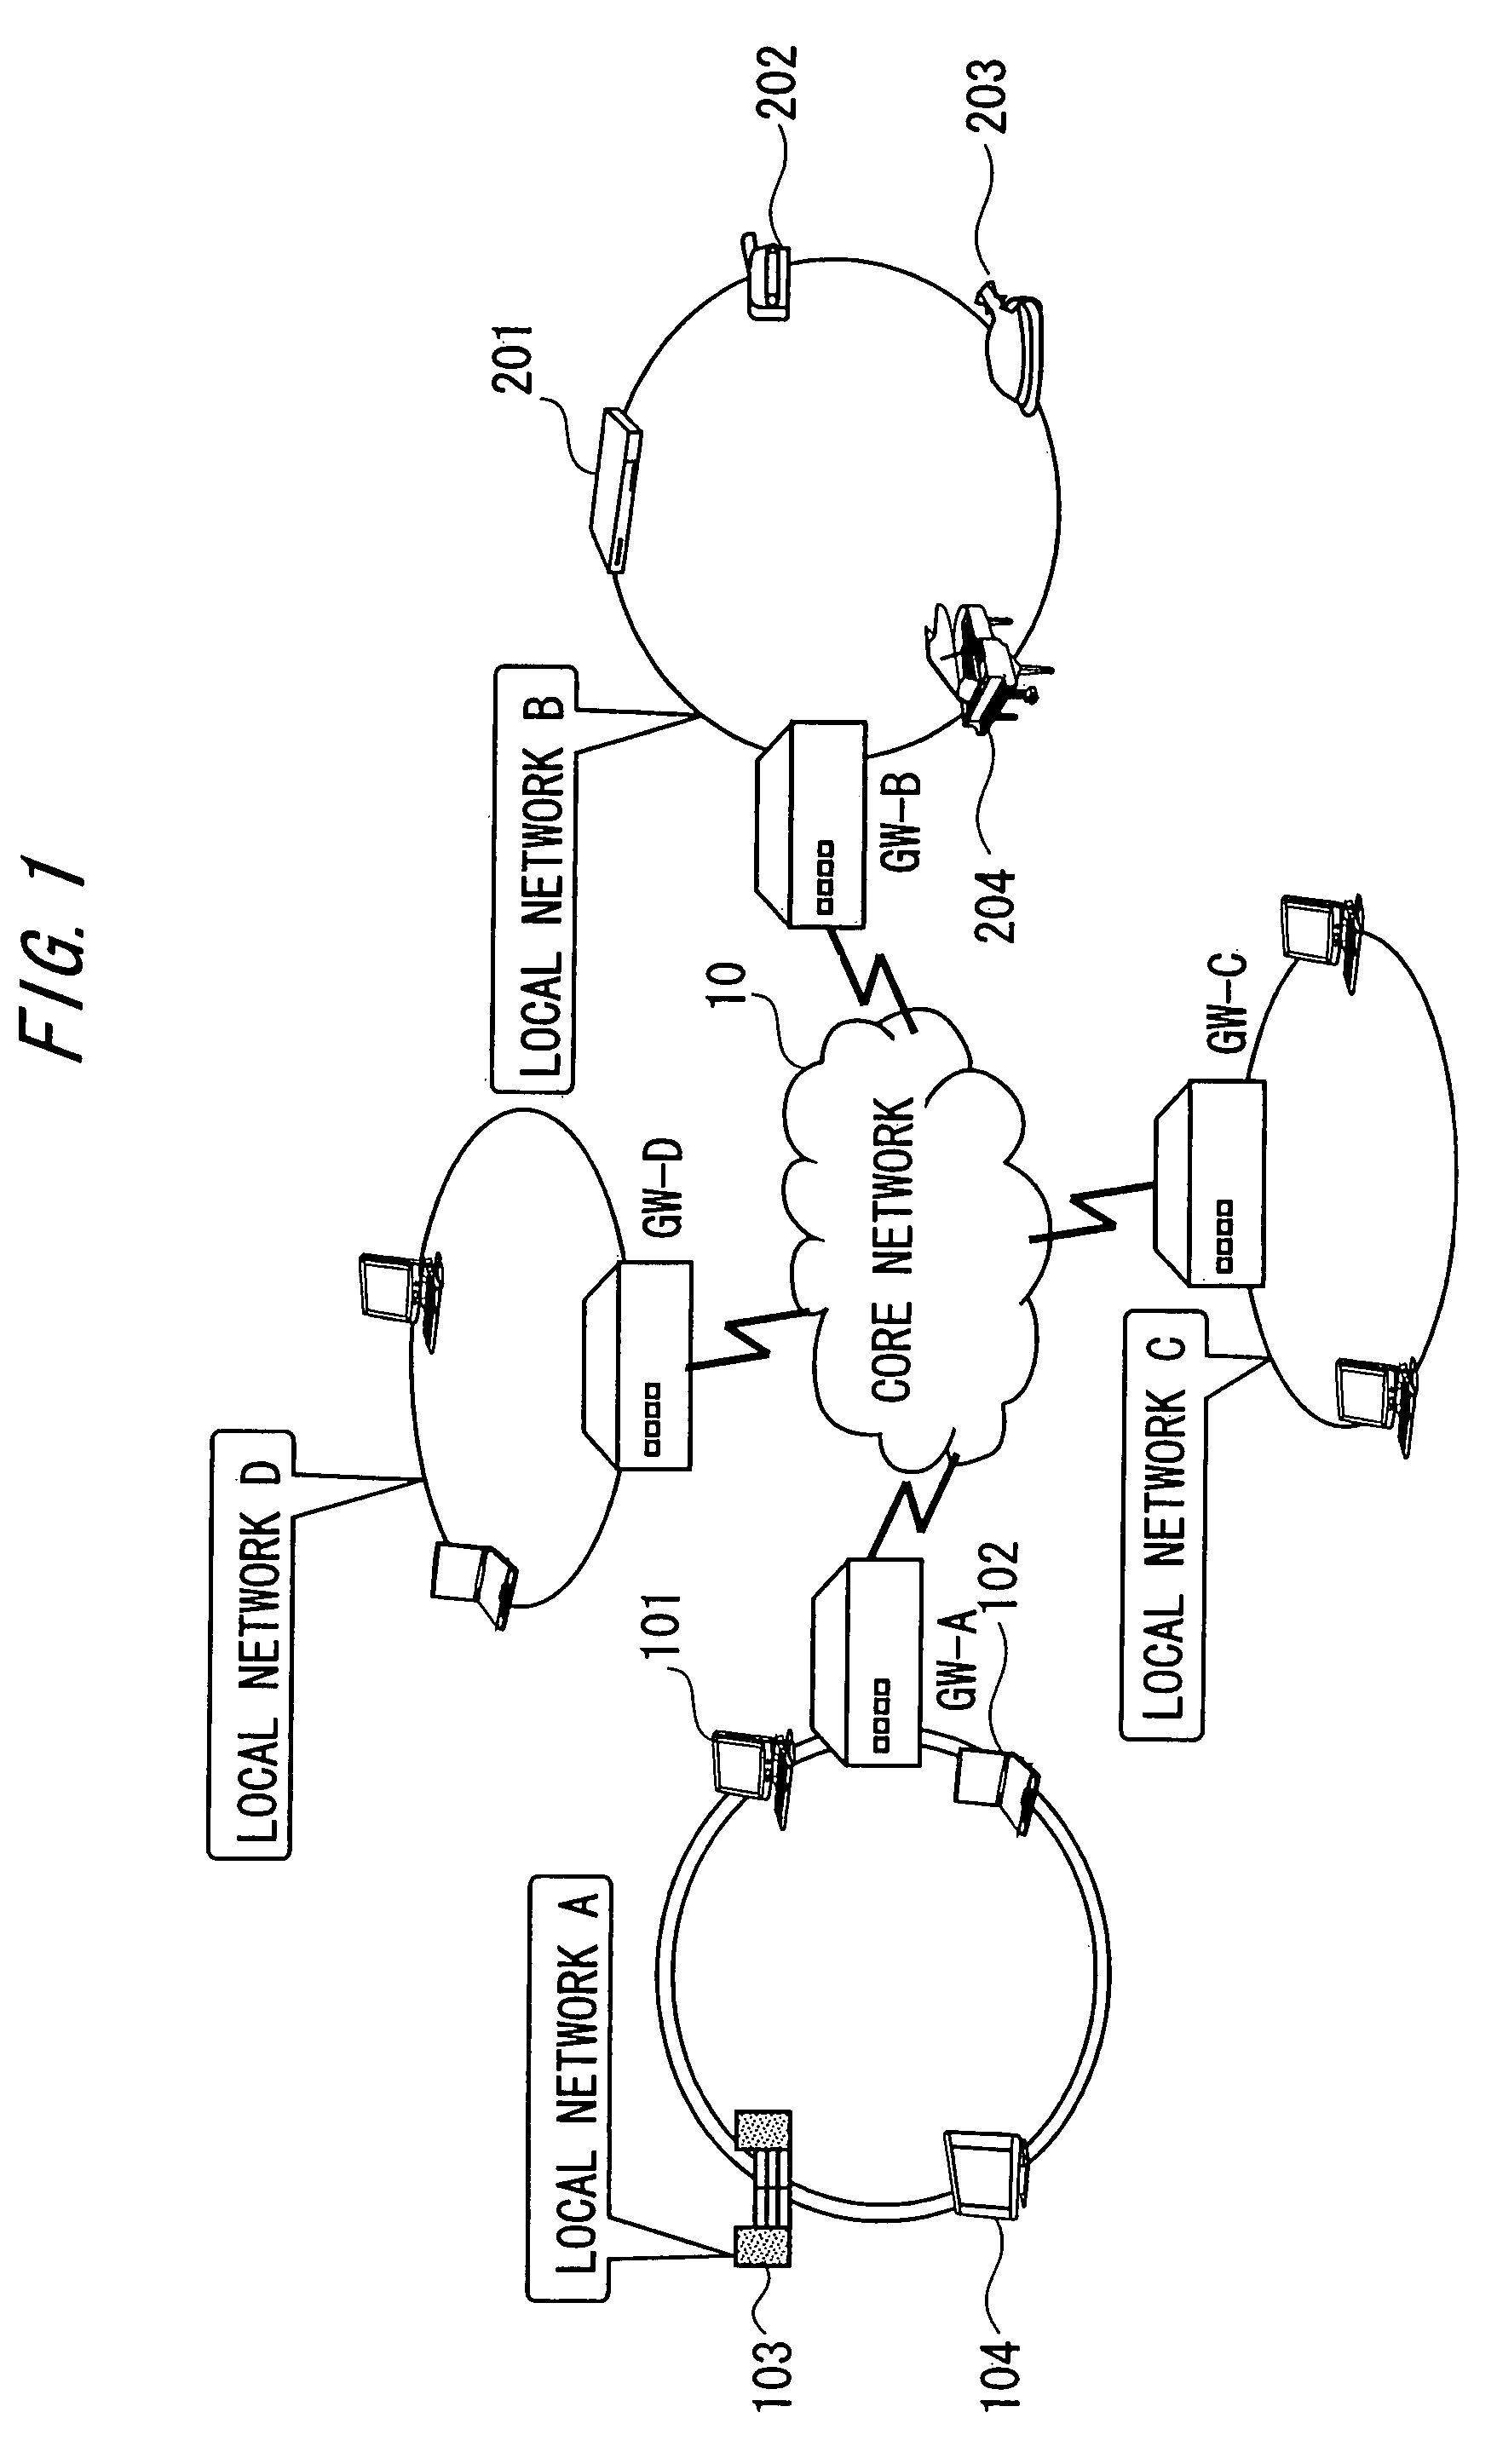 Packet relay device